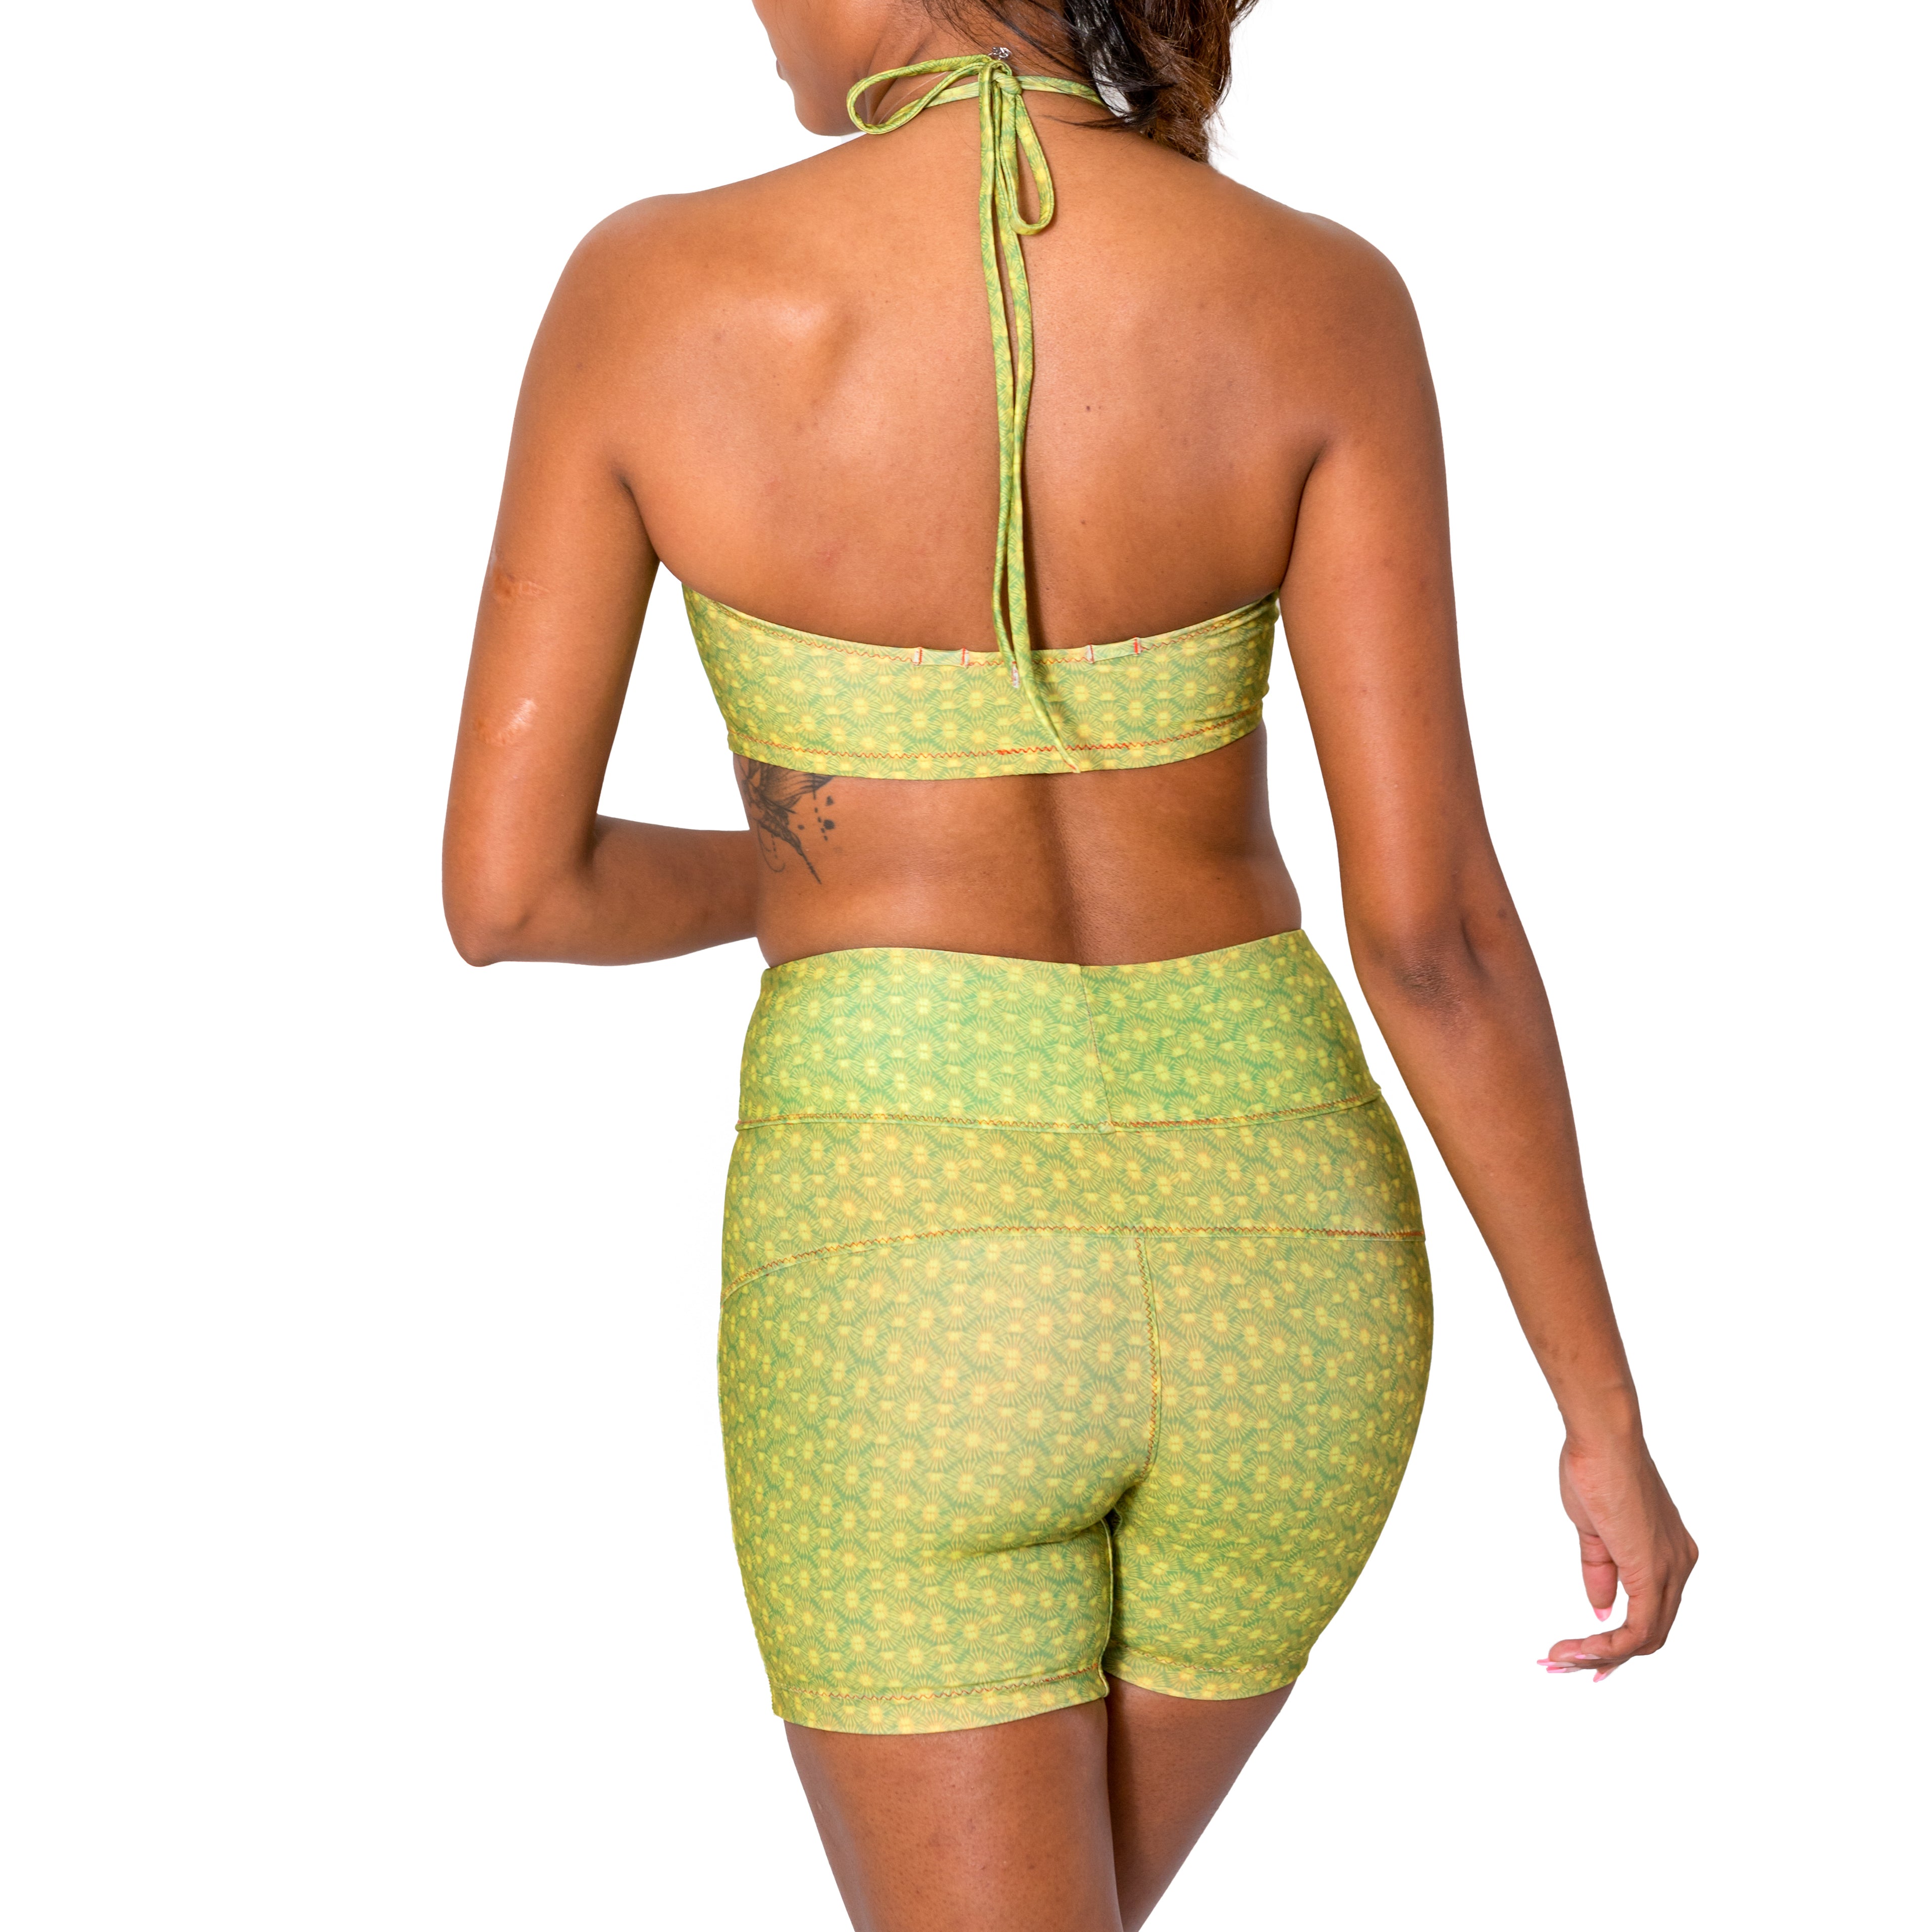 Aima Dora - High Neck Top - Back / Turtle Bay - Baie aux tortues